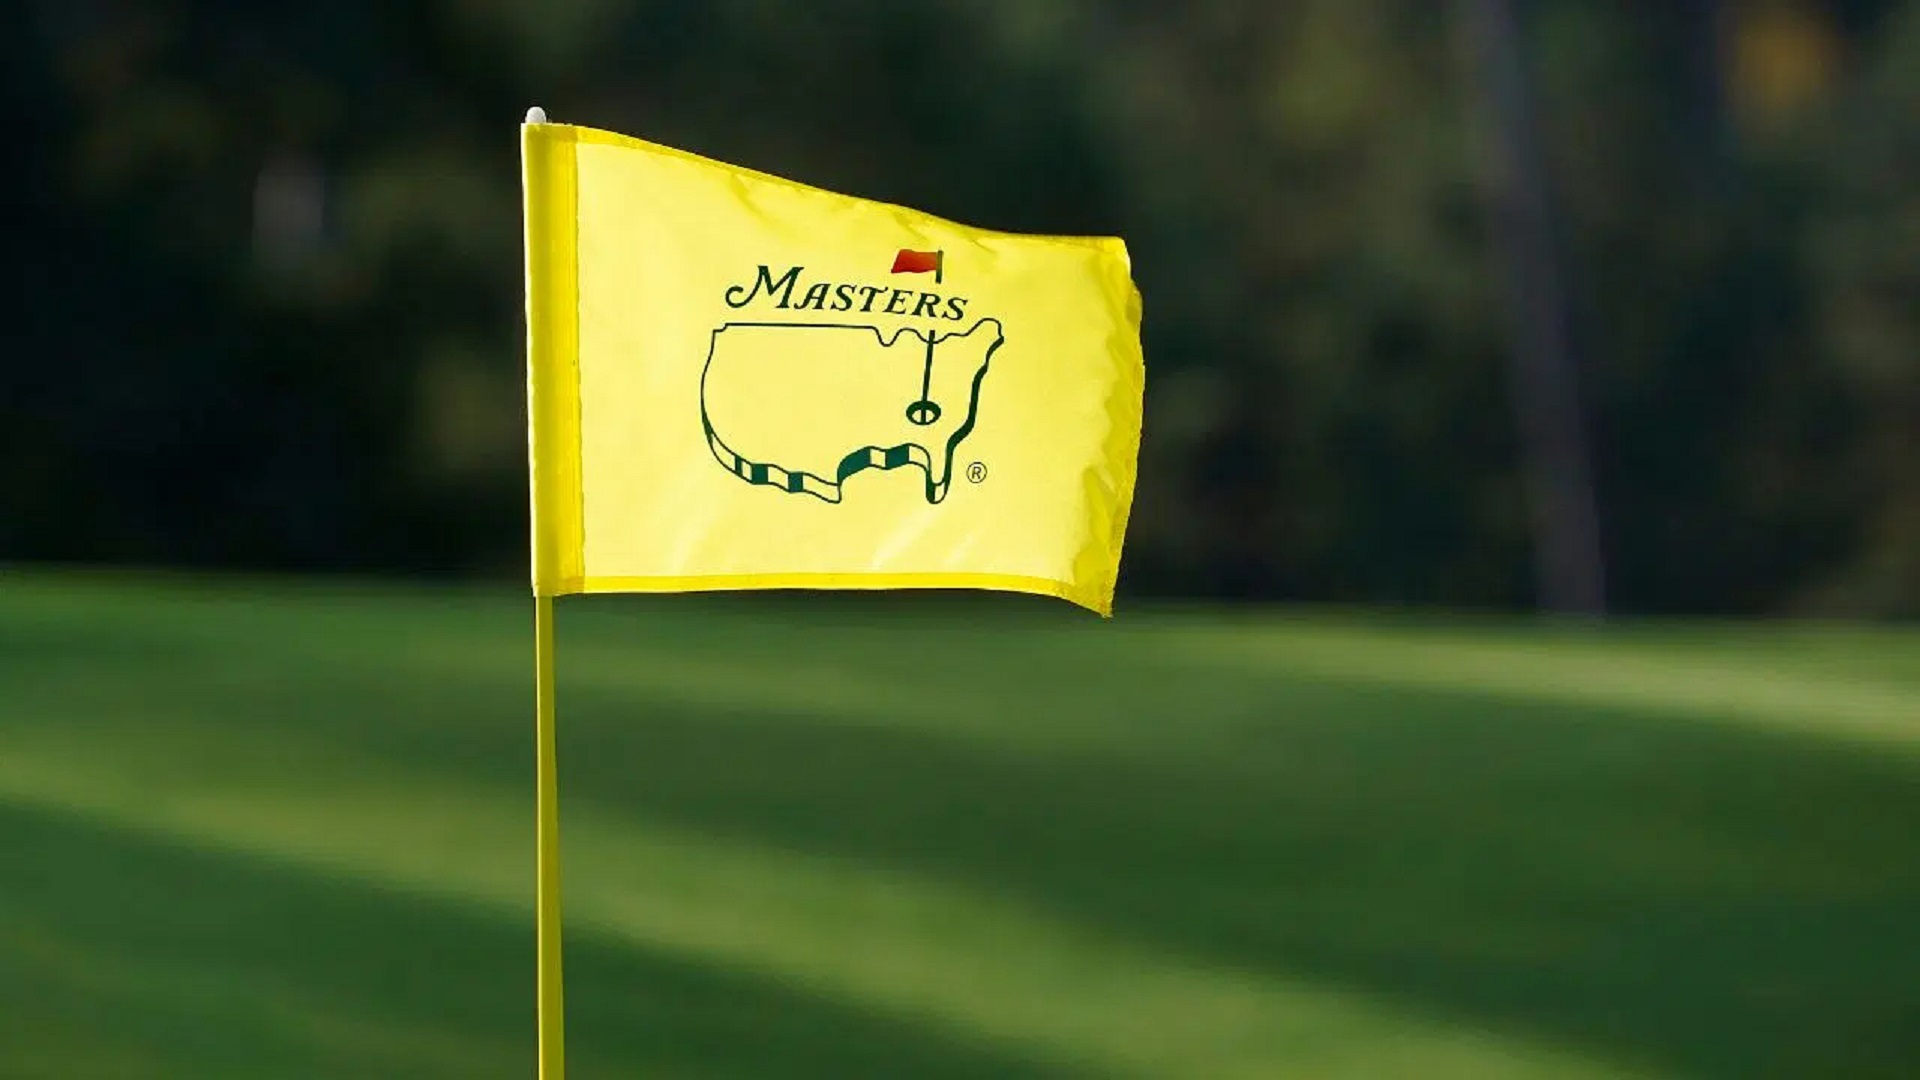 The Masters Tournament live Stream View ‘2021 Masters Golf’ round by